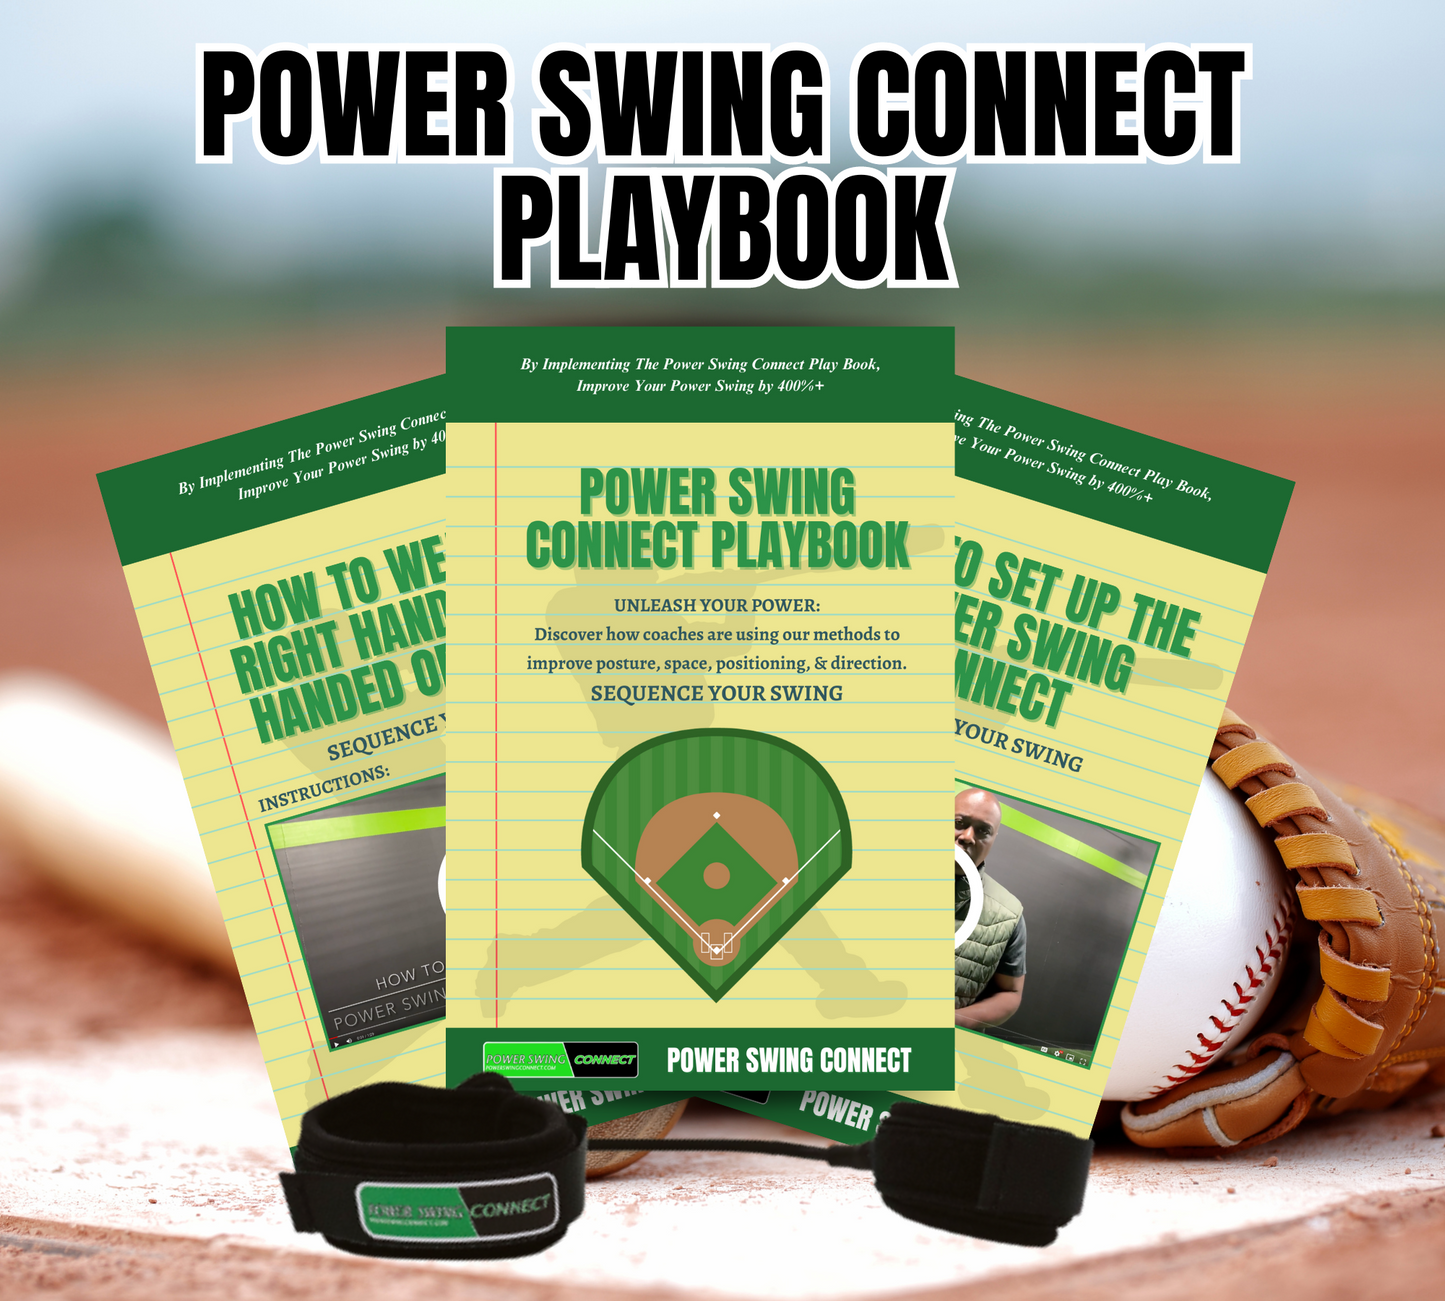 POWER SWING CONNECT + Playbook (4 Pack) (2 Thick + 2 Slim)